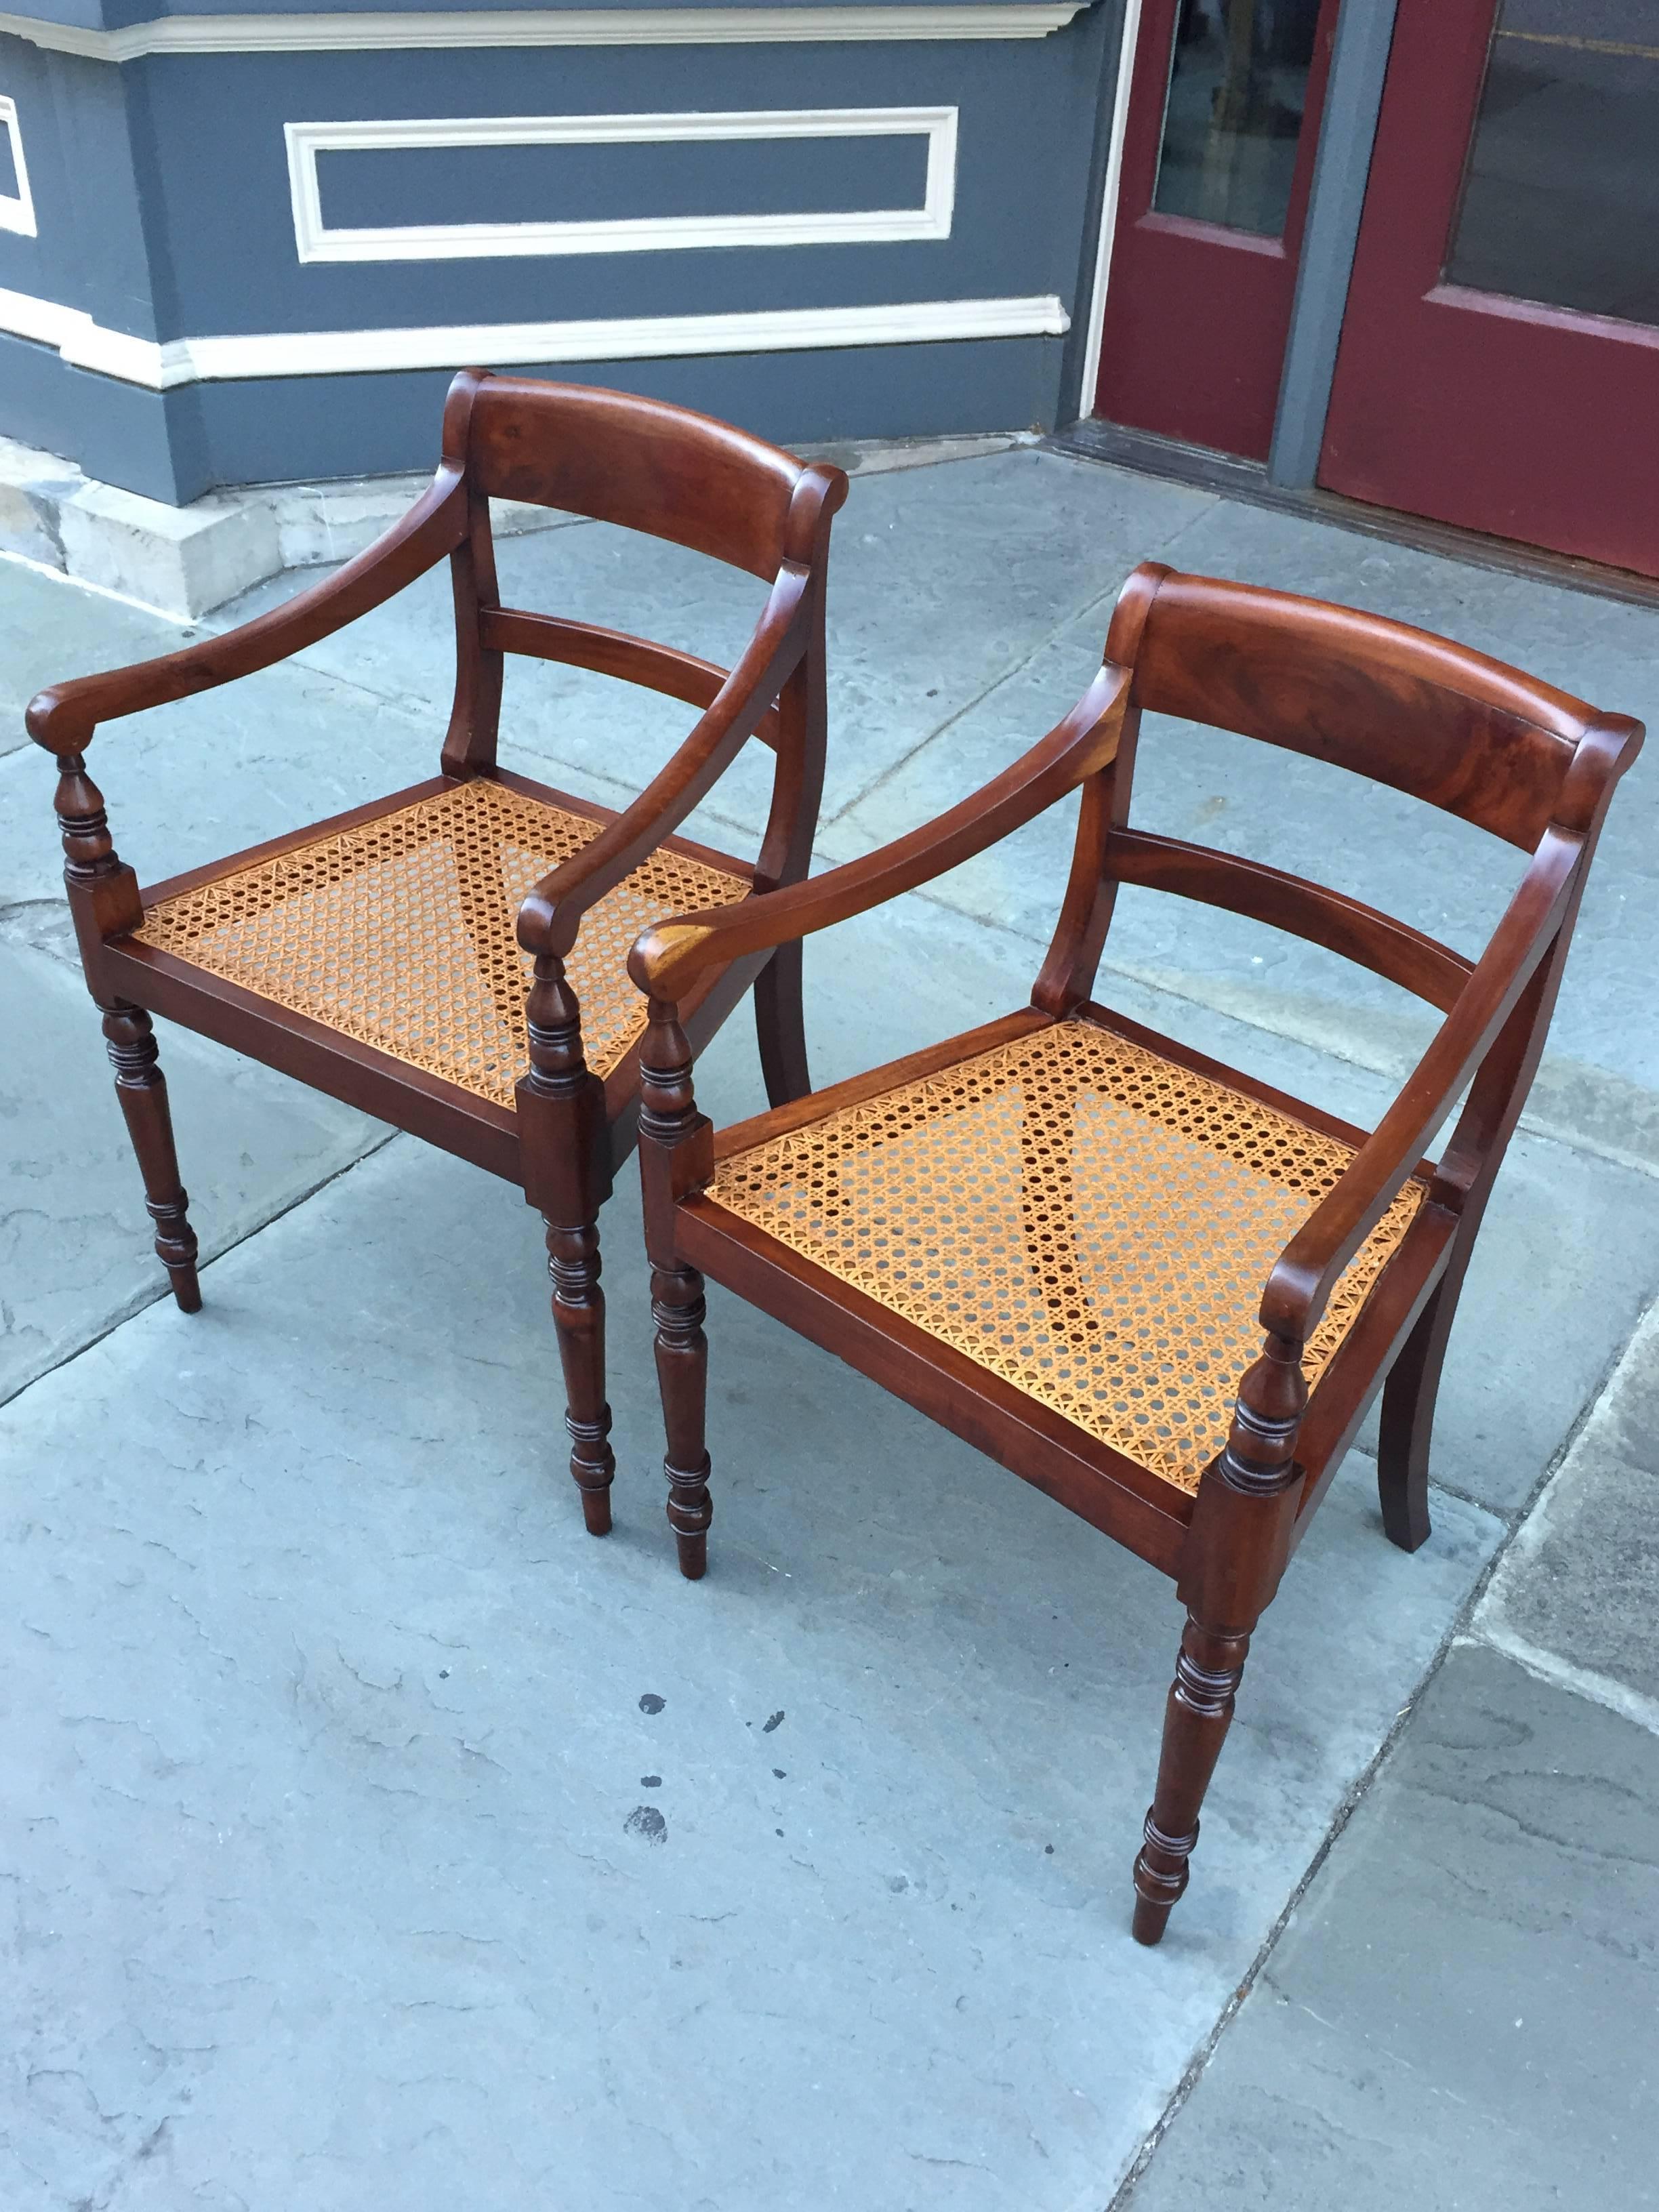 A pair of circa 1810 mahogany armchairs from Barbados, with turned legs and arm posts, shaped arms, and hand-caned seat. This pair of chairs are featured in 